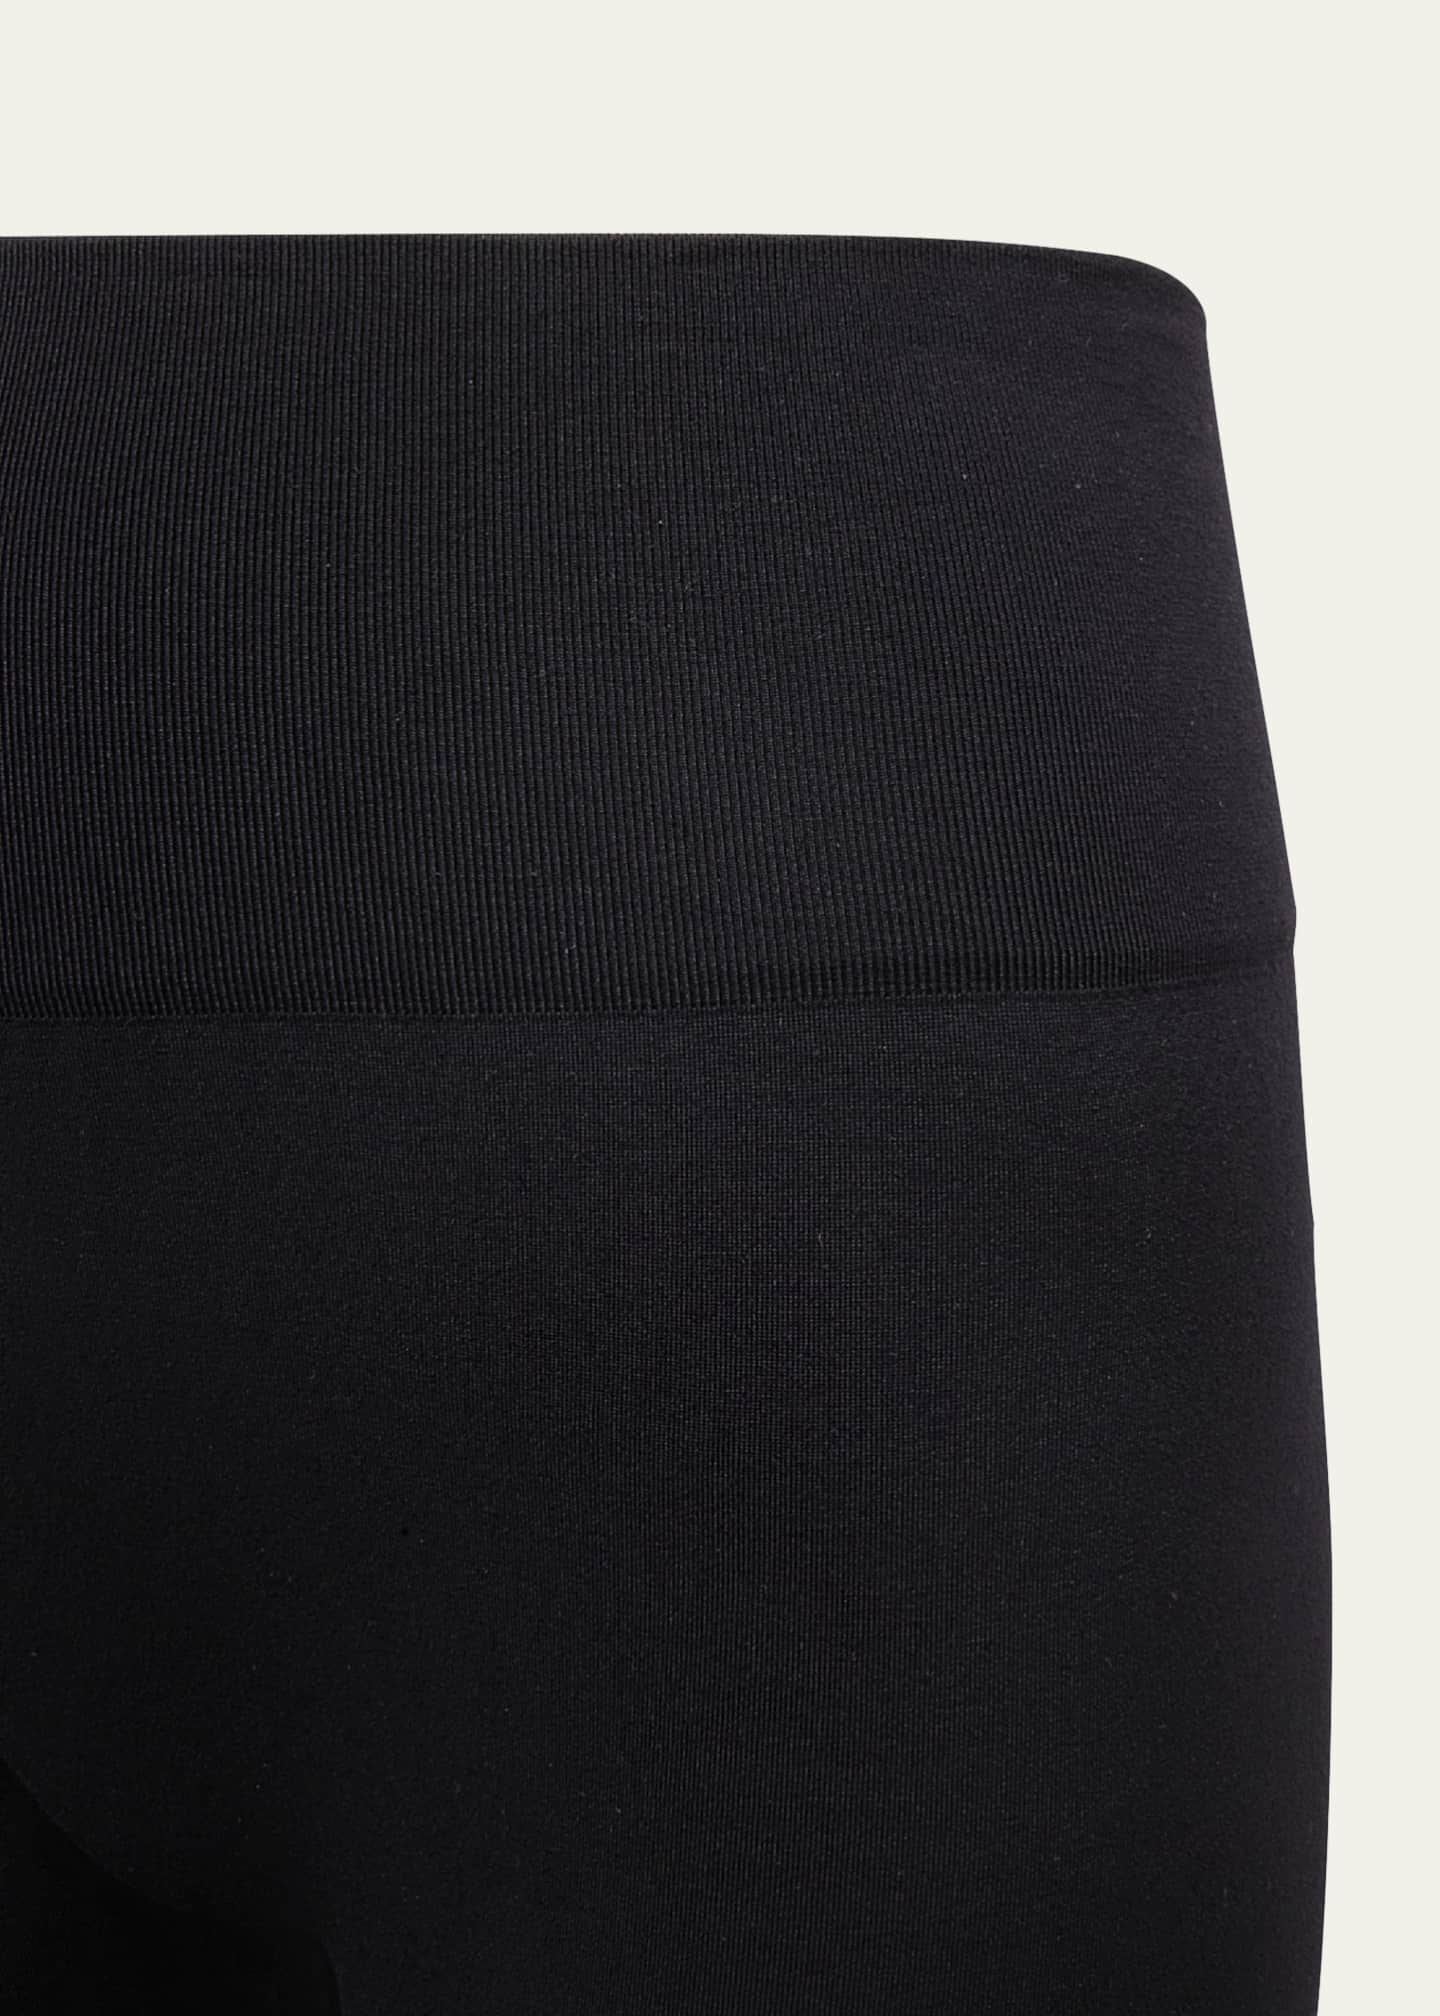 Wolford Perfect Fit Leggings S BLACK Breathable / Gute